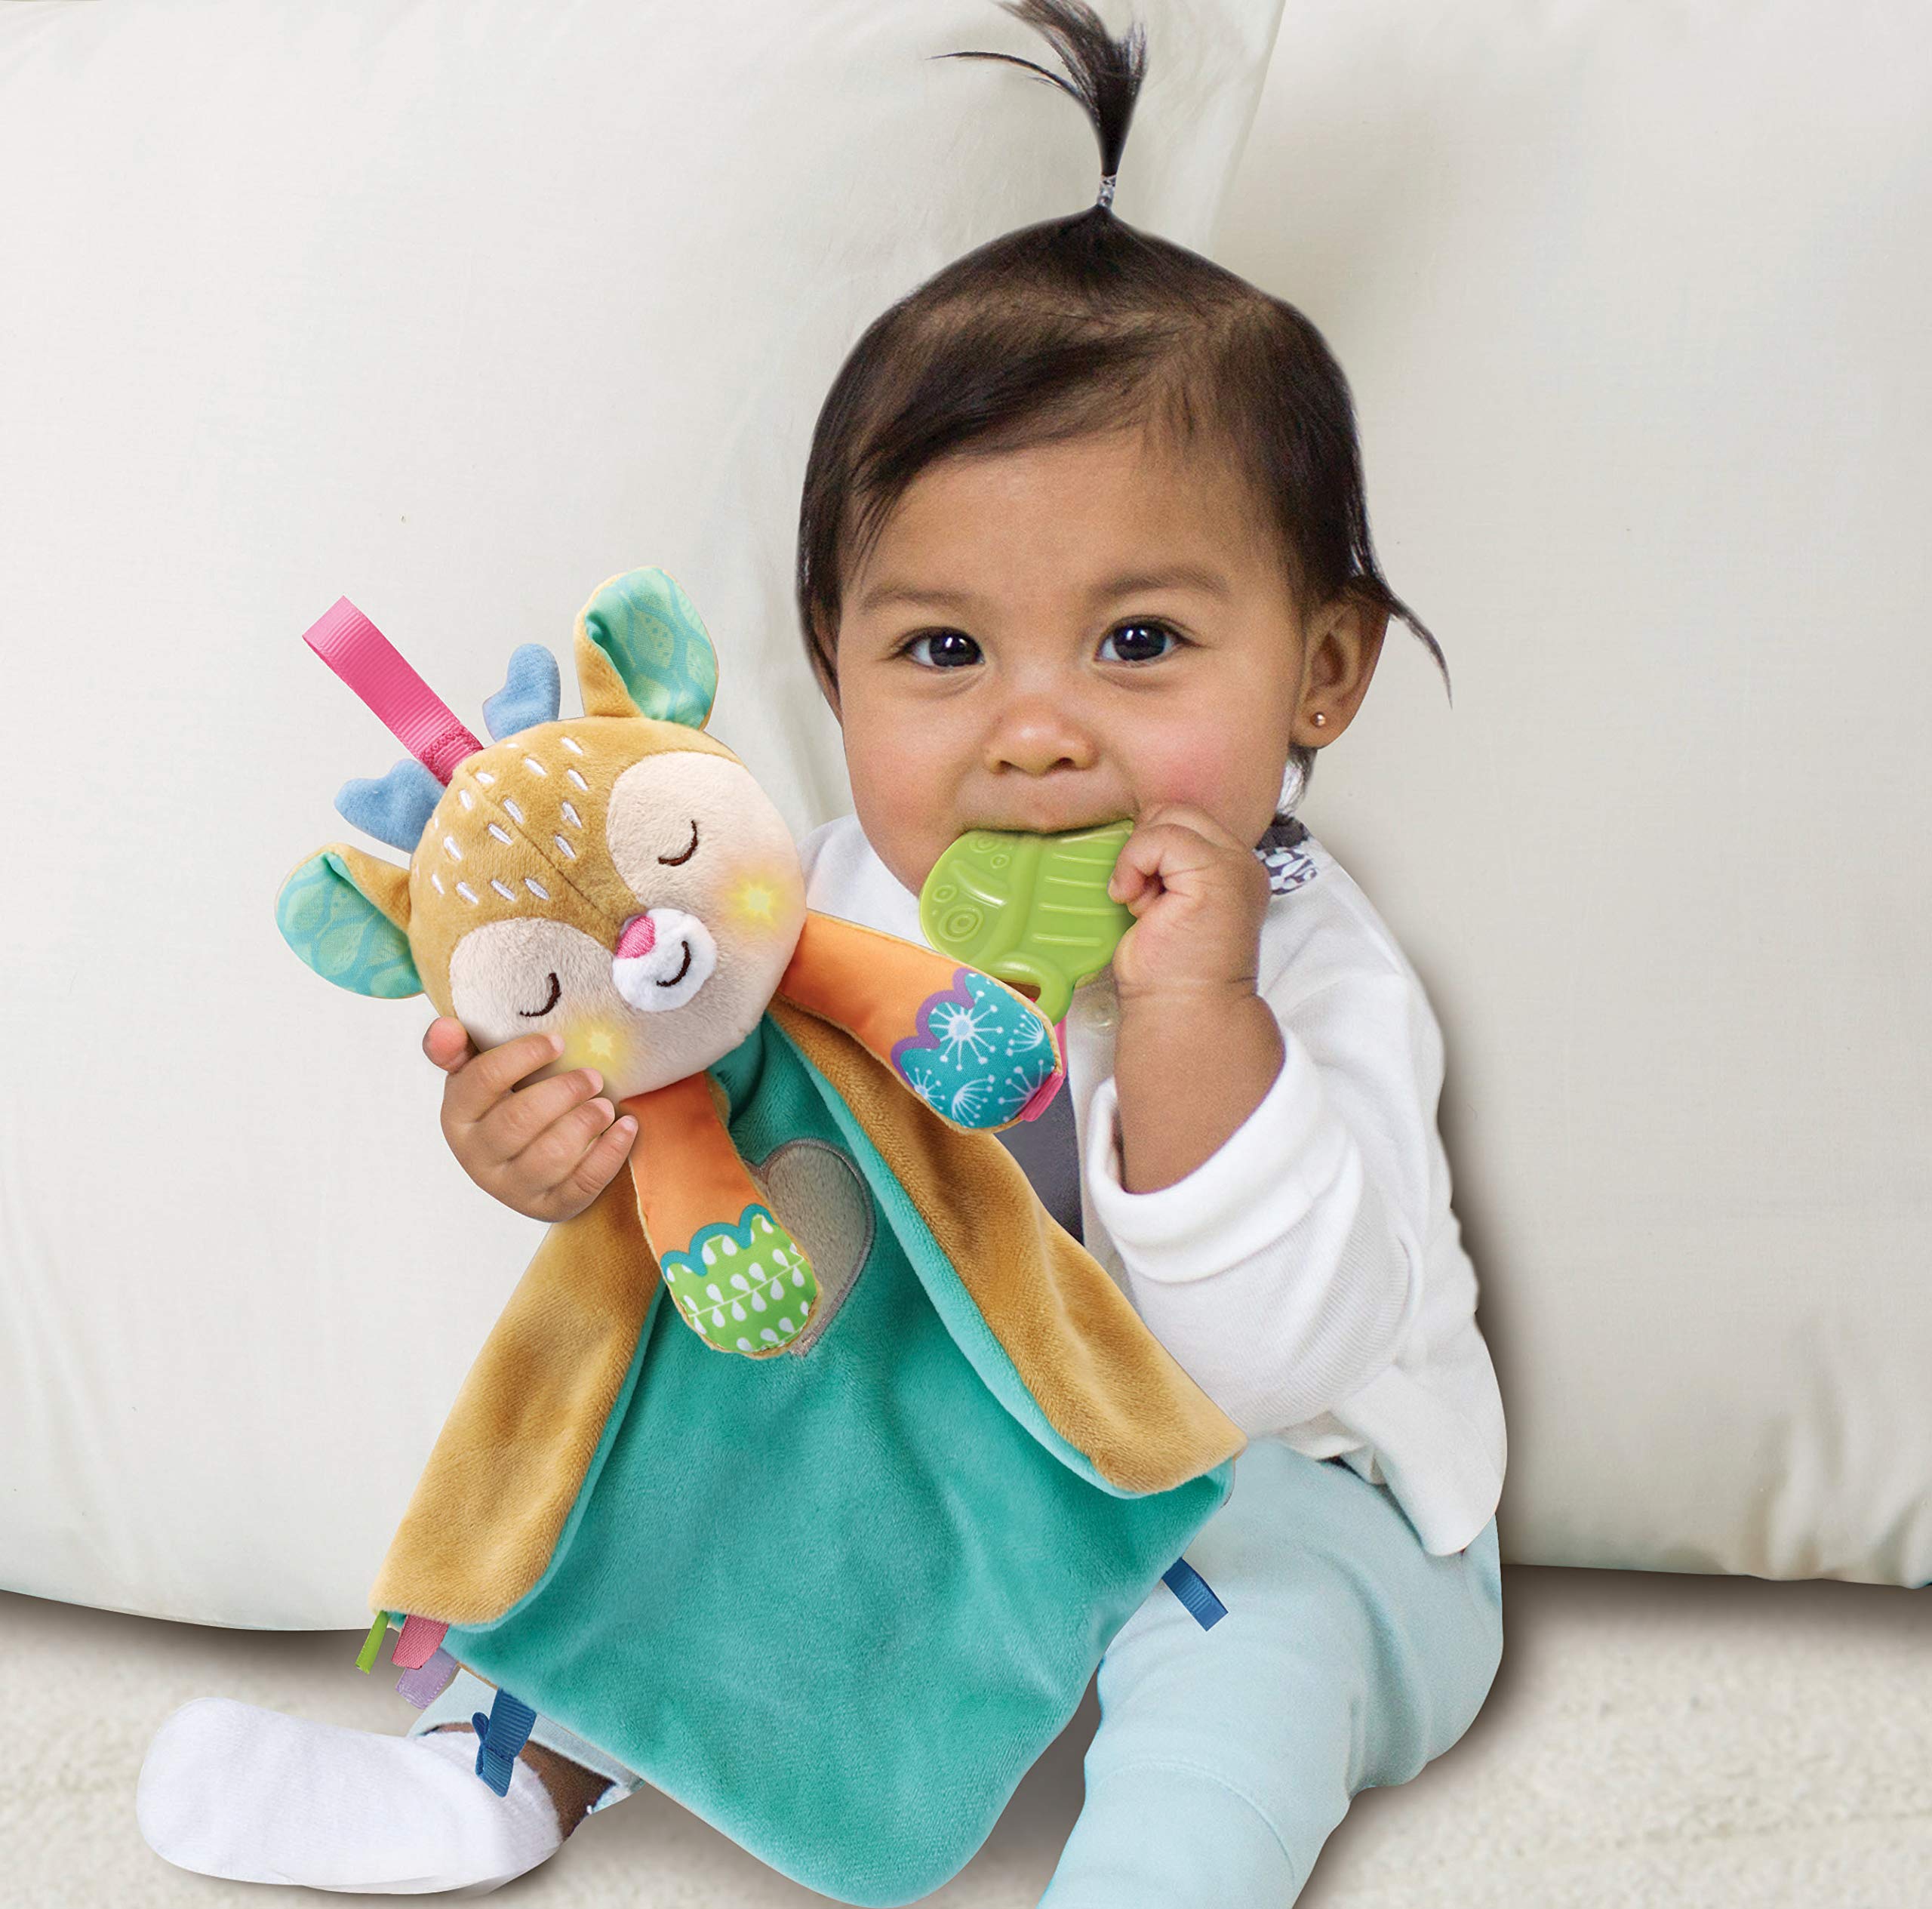 VTECH MY FRIEND FAWN COMFORT BLANKET AND TEETHER